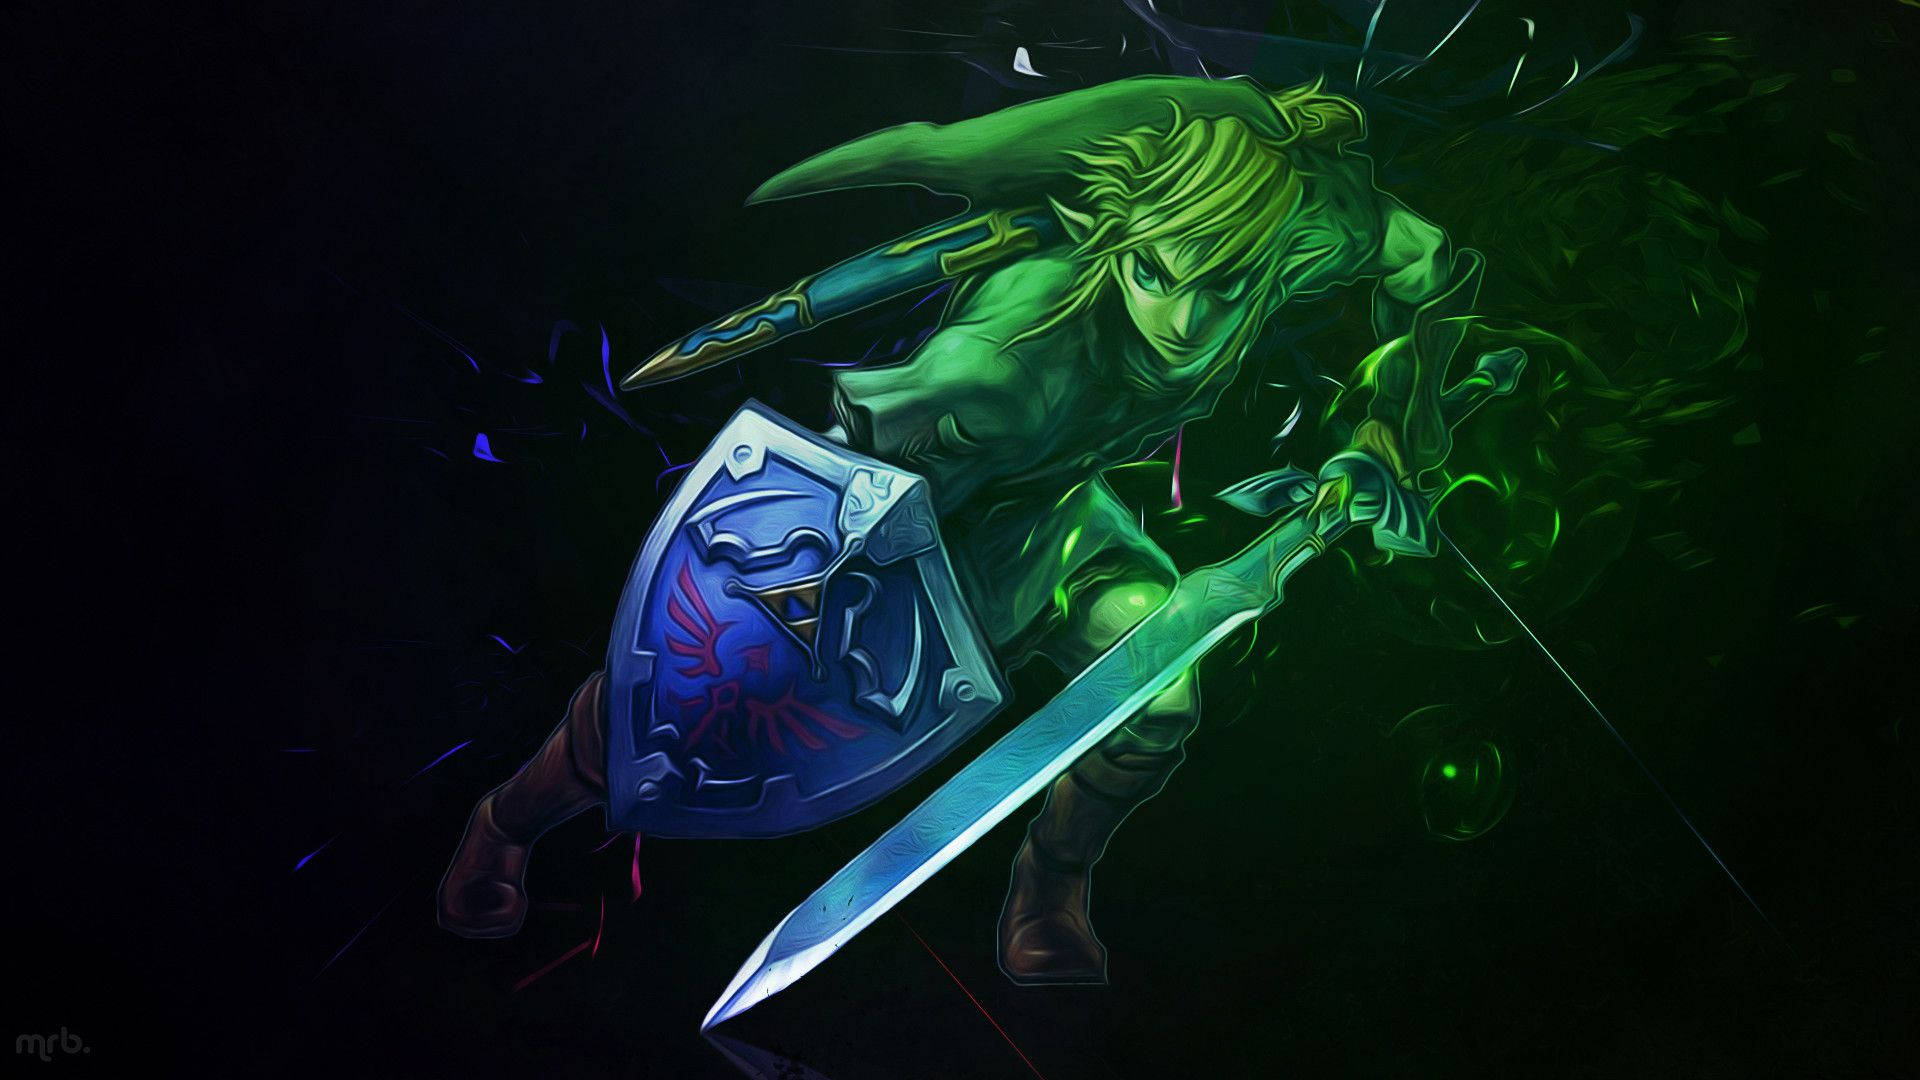 Explore the Magical Realm of Hyrule with the Legend of Zelda Wallpaper